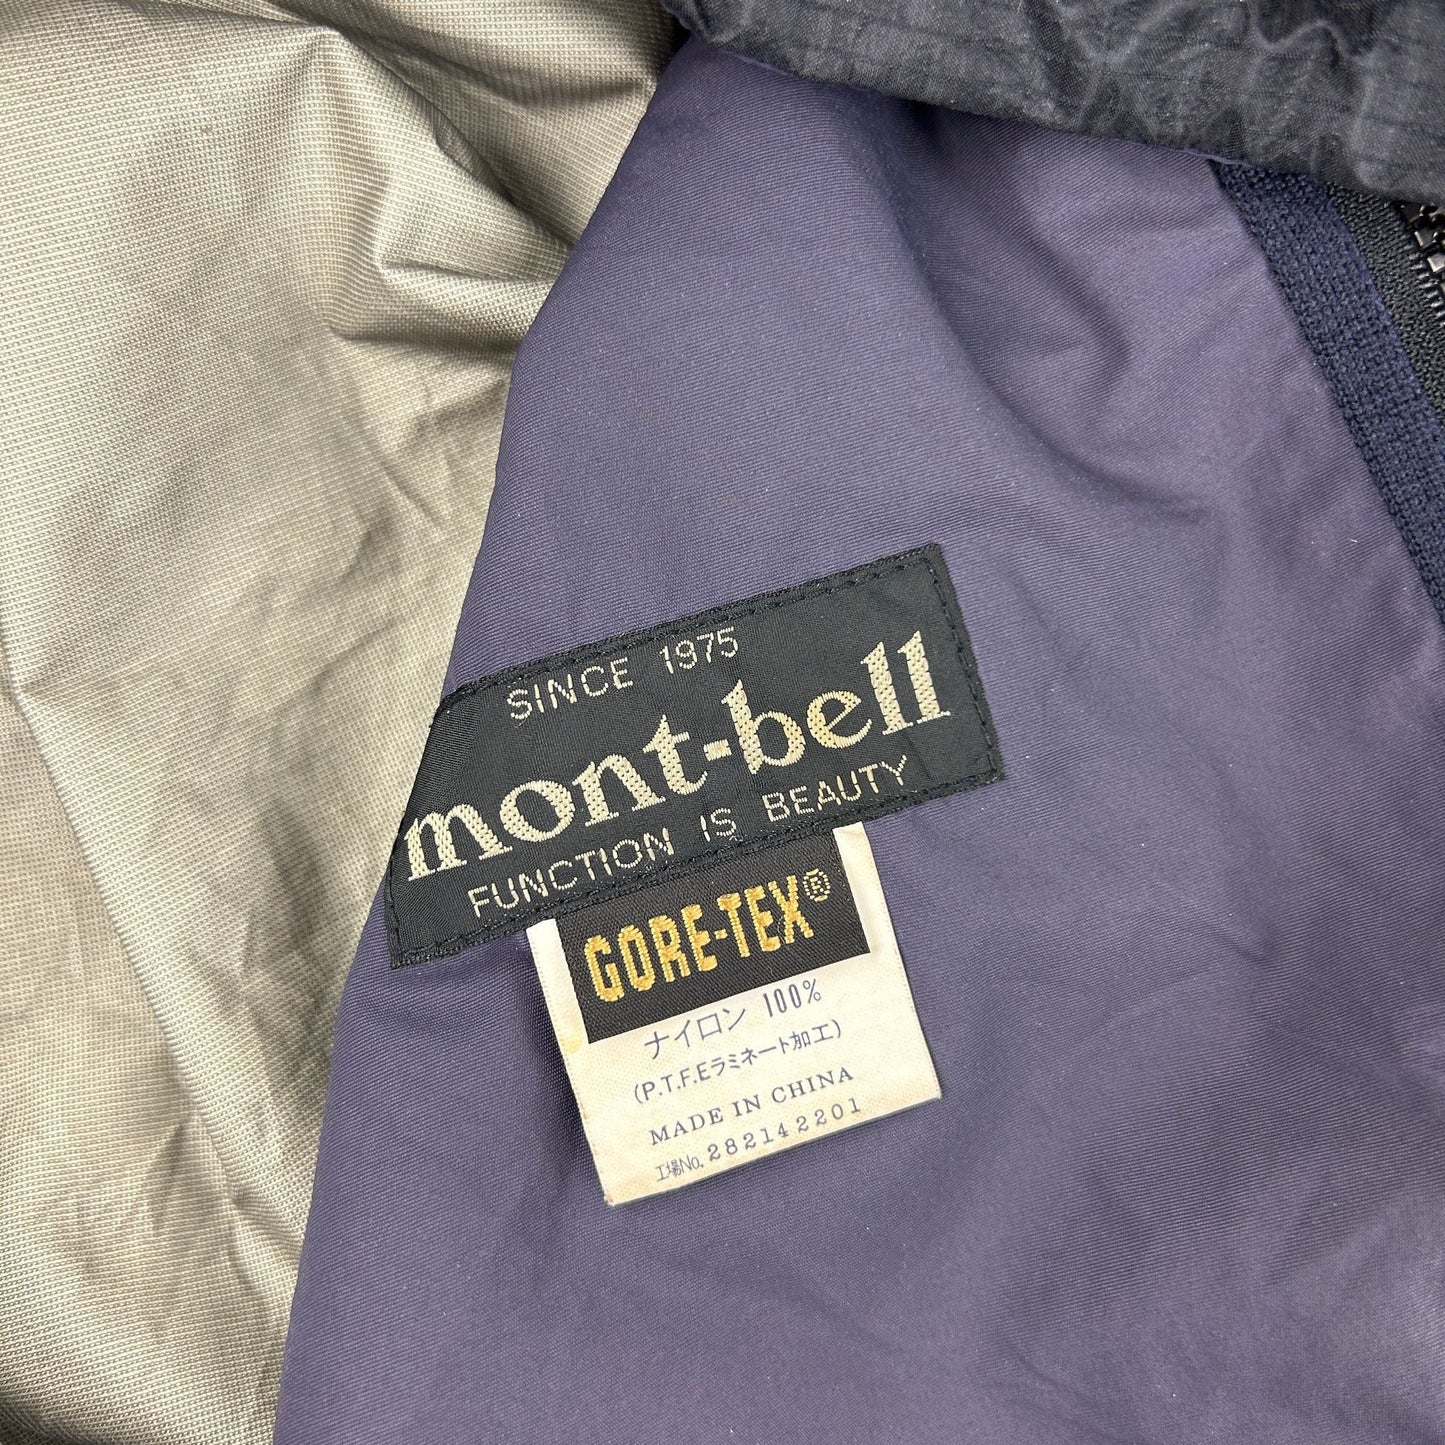 Vintage Montbell GORE-TEX Jacket Woman's Size XS